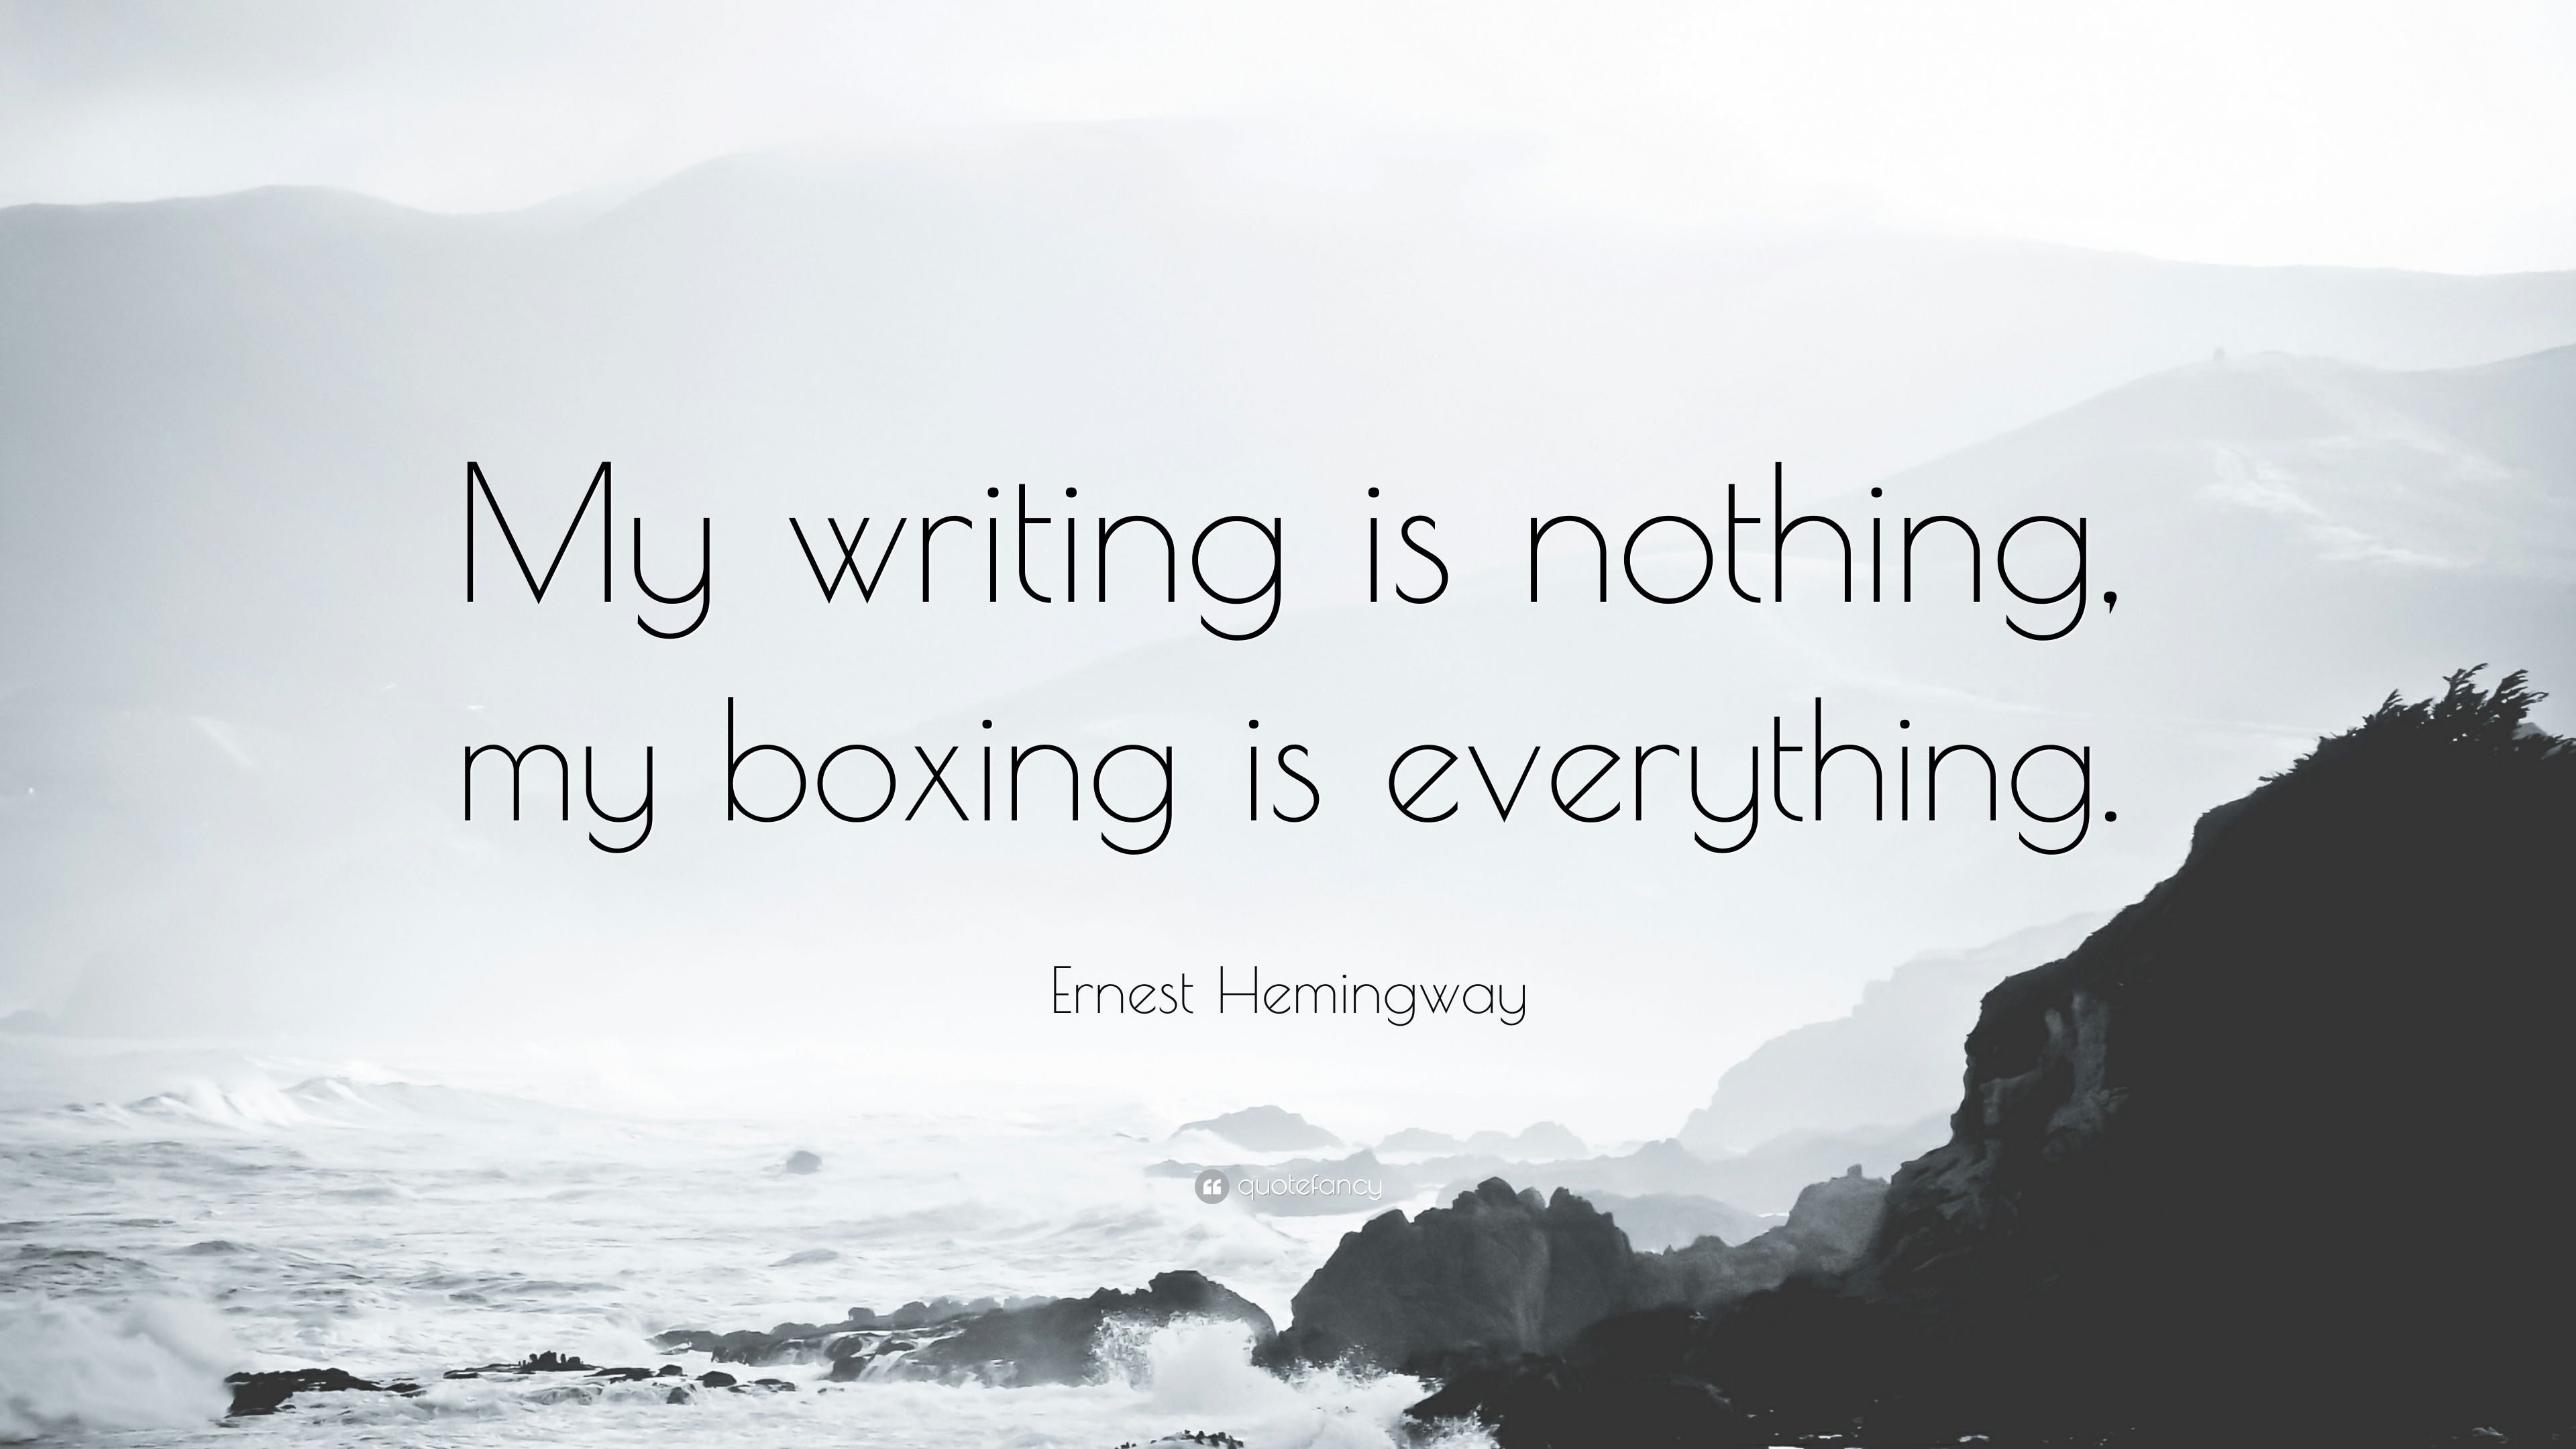 Ernest Hemingway Quote: “My writing is nothing, my boxing is everything.” (12 wallpaper)